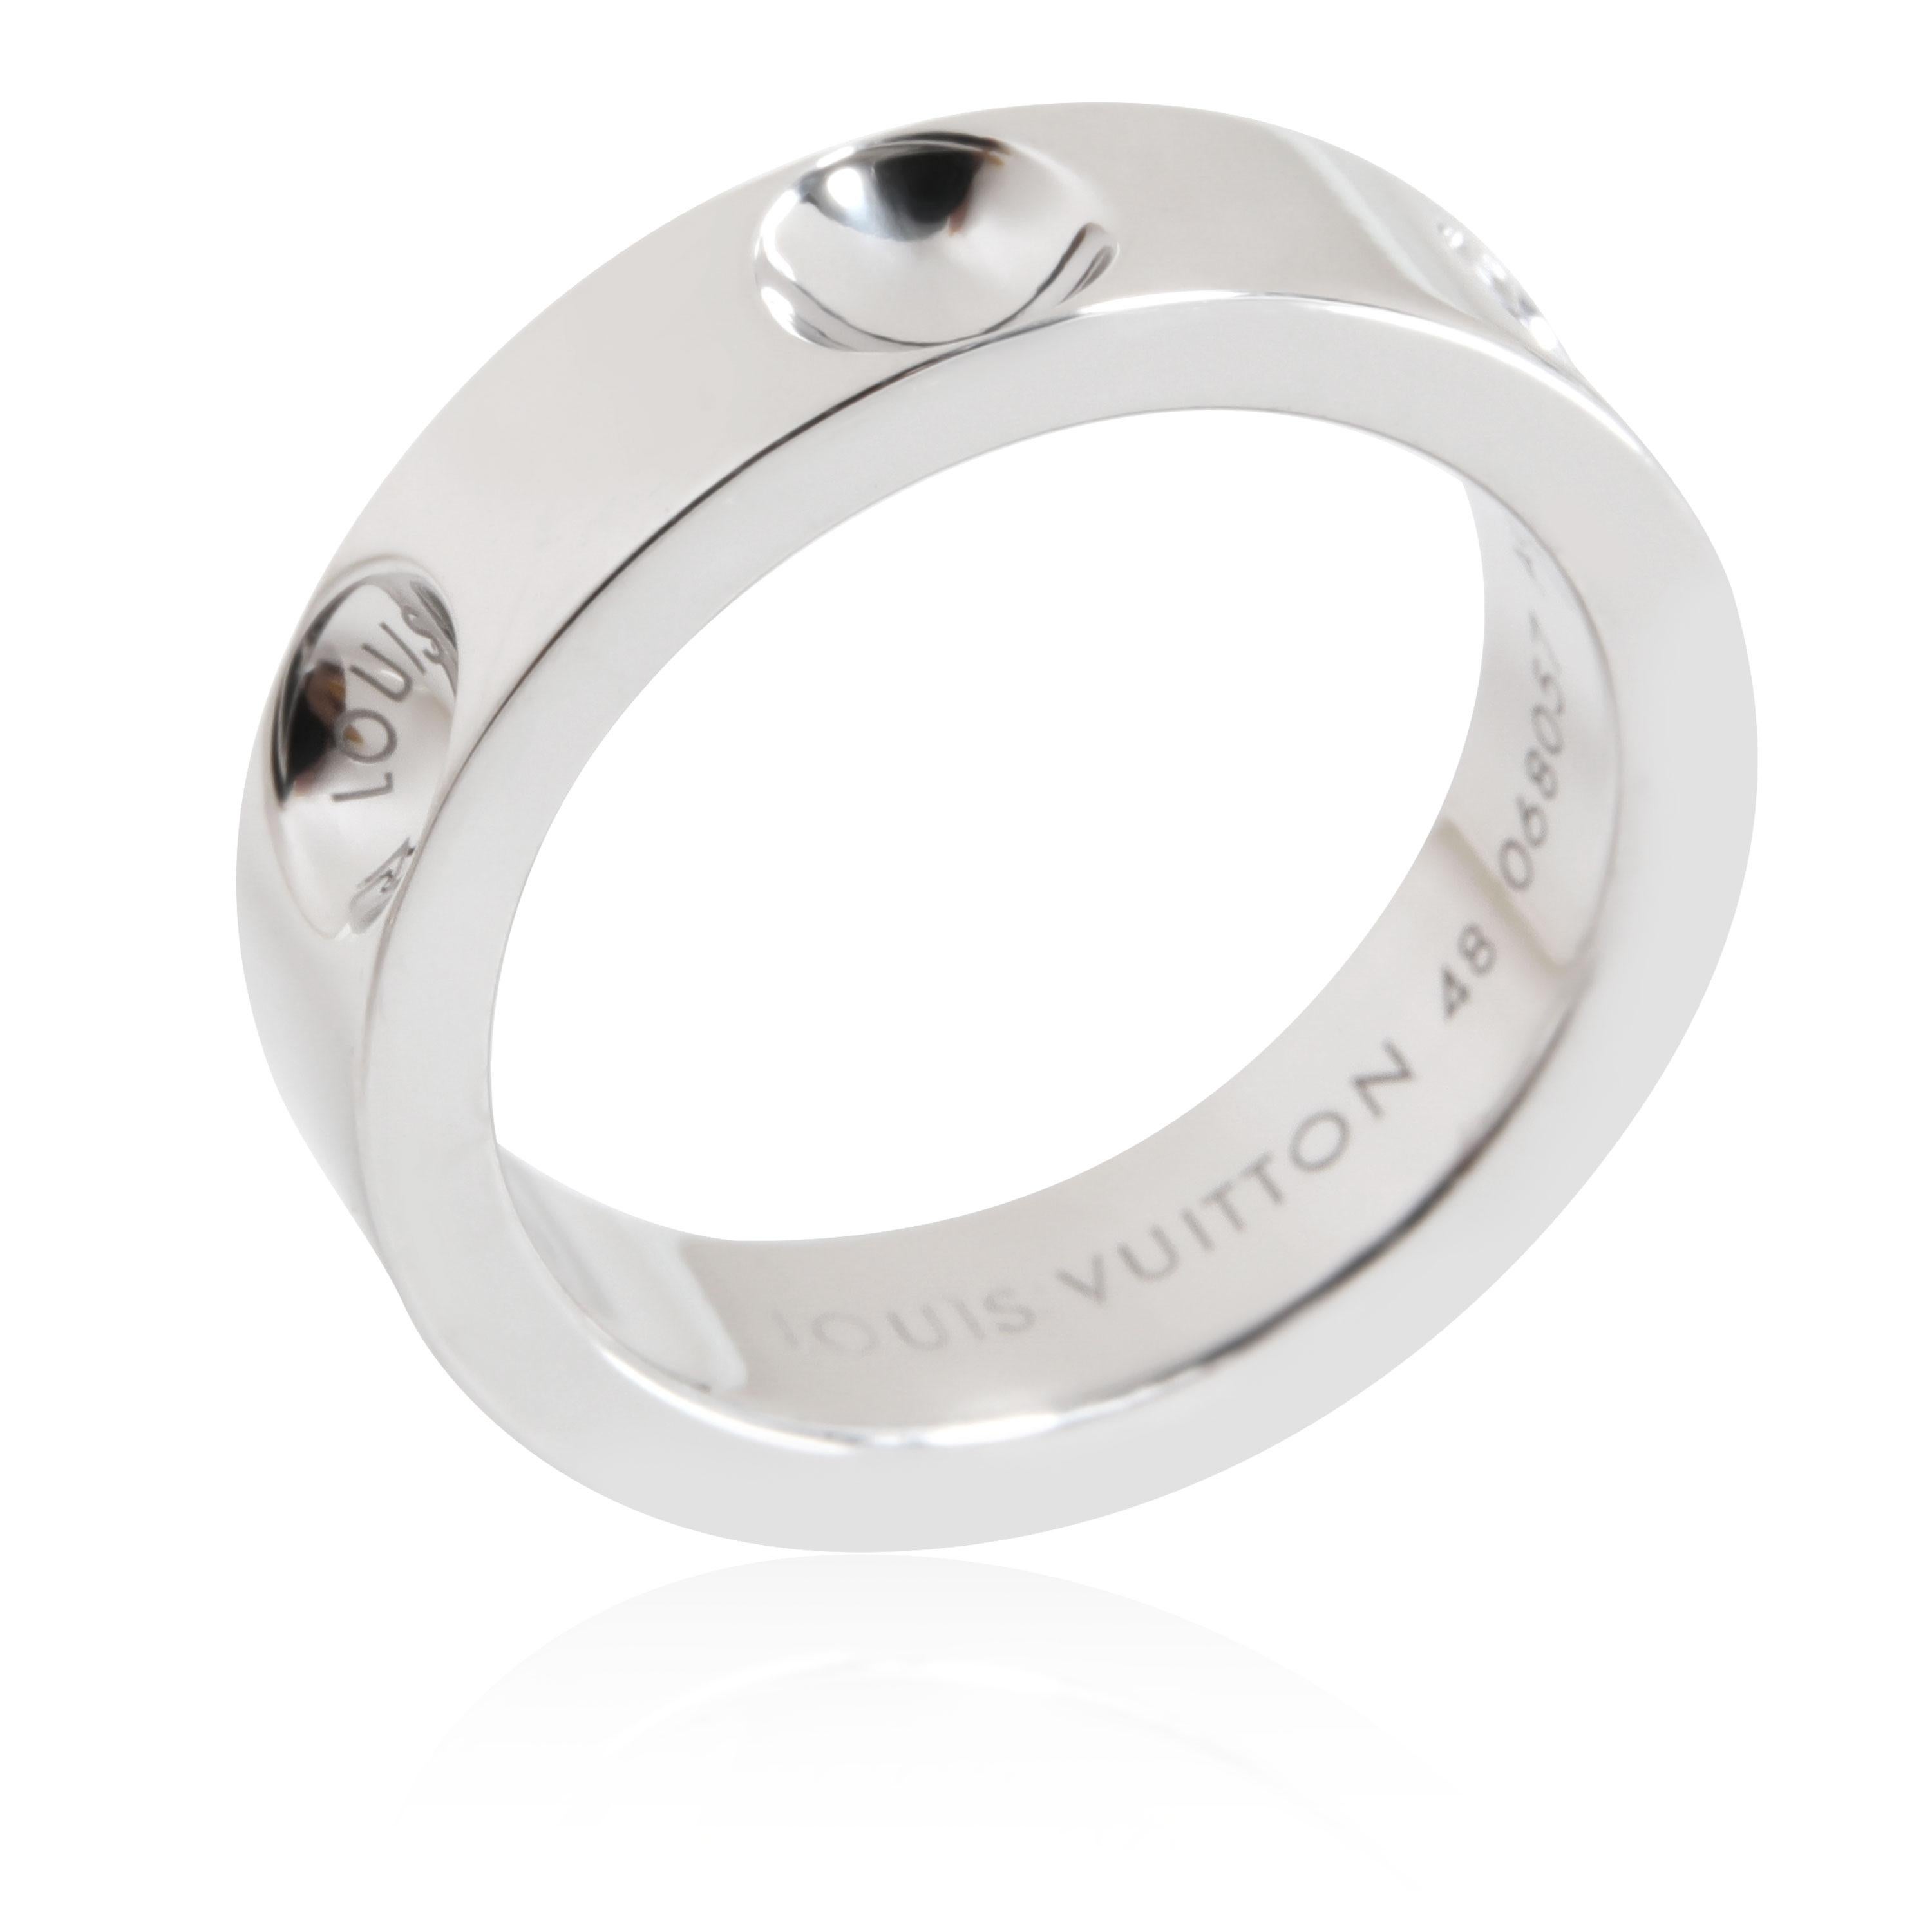 Louis Vuitton Empreinte Band in 18K White Gold

PRIMARY DETAILS
SKU: 111612
Listing Title: Louis Vuitton Empreinte Band in 18K White Gold
Condition Description: Retails for 1,500 USD. In excellent condition and recently polished. Ring size is